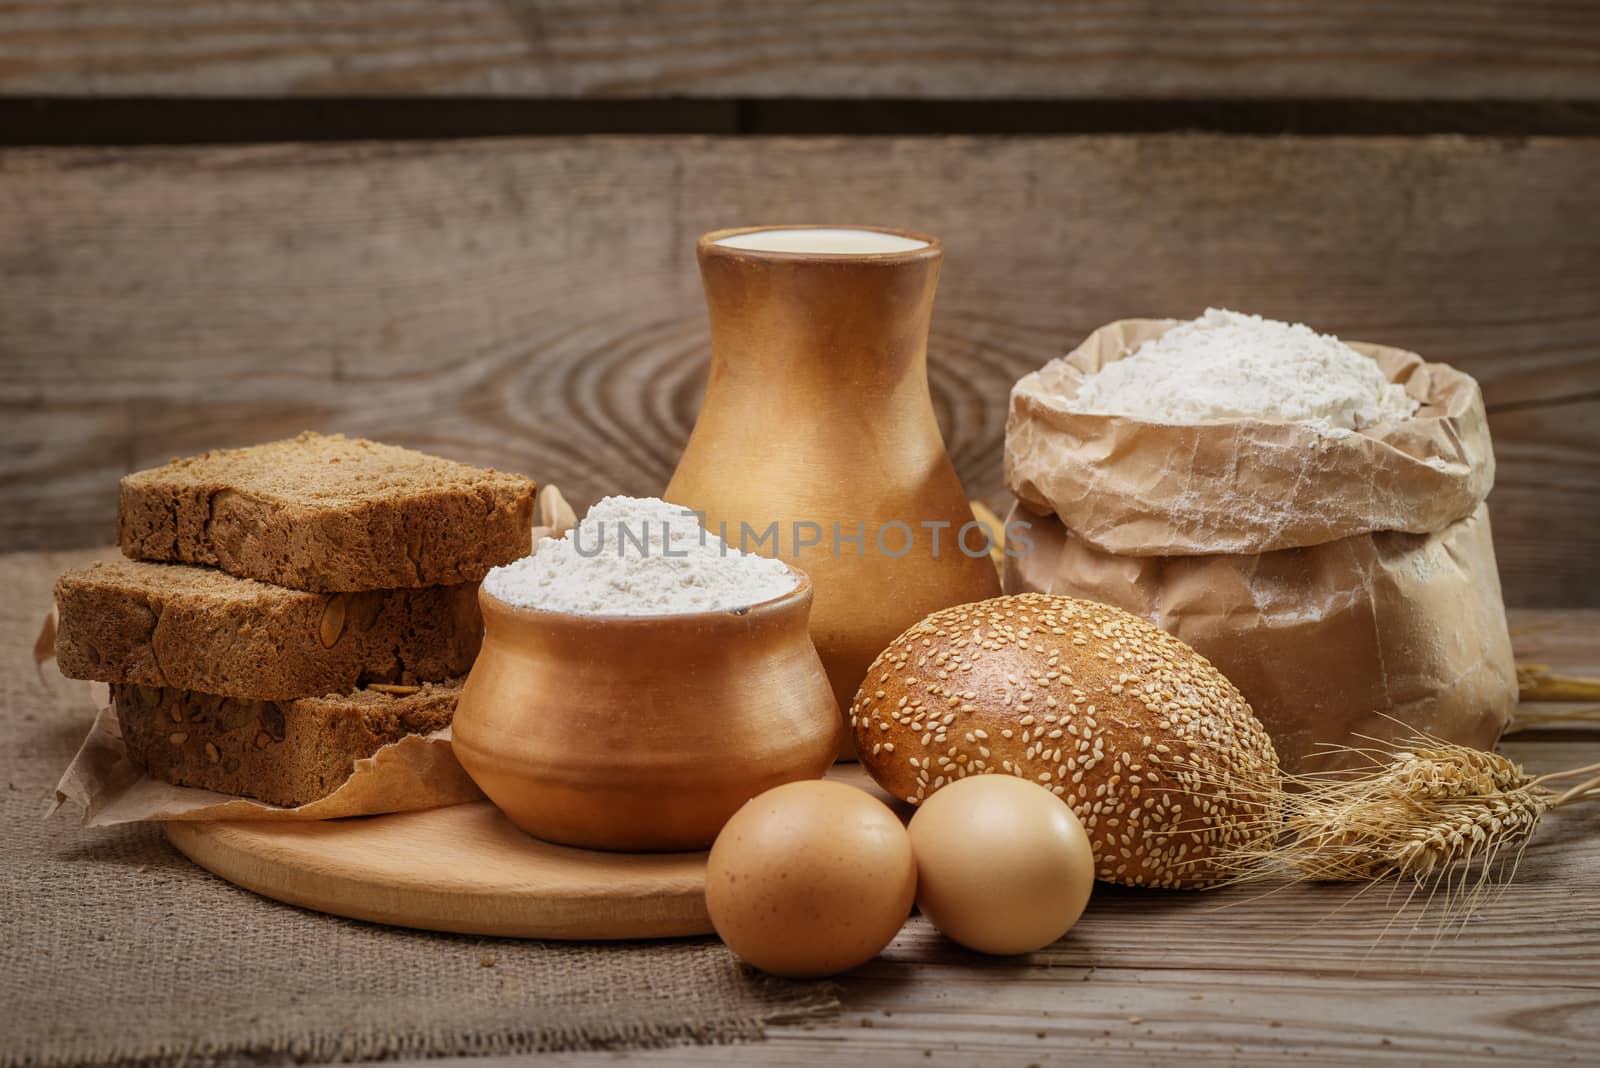 Ingredients for baking bread and pastry, milk, wheat flour, eggs, bun with sesame, rustic bread, cut into pieces, ears of wheat on the old wooden background